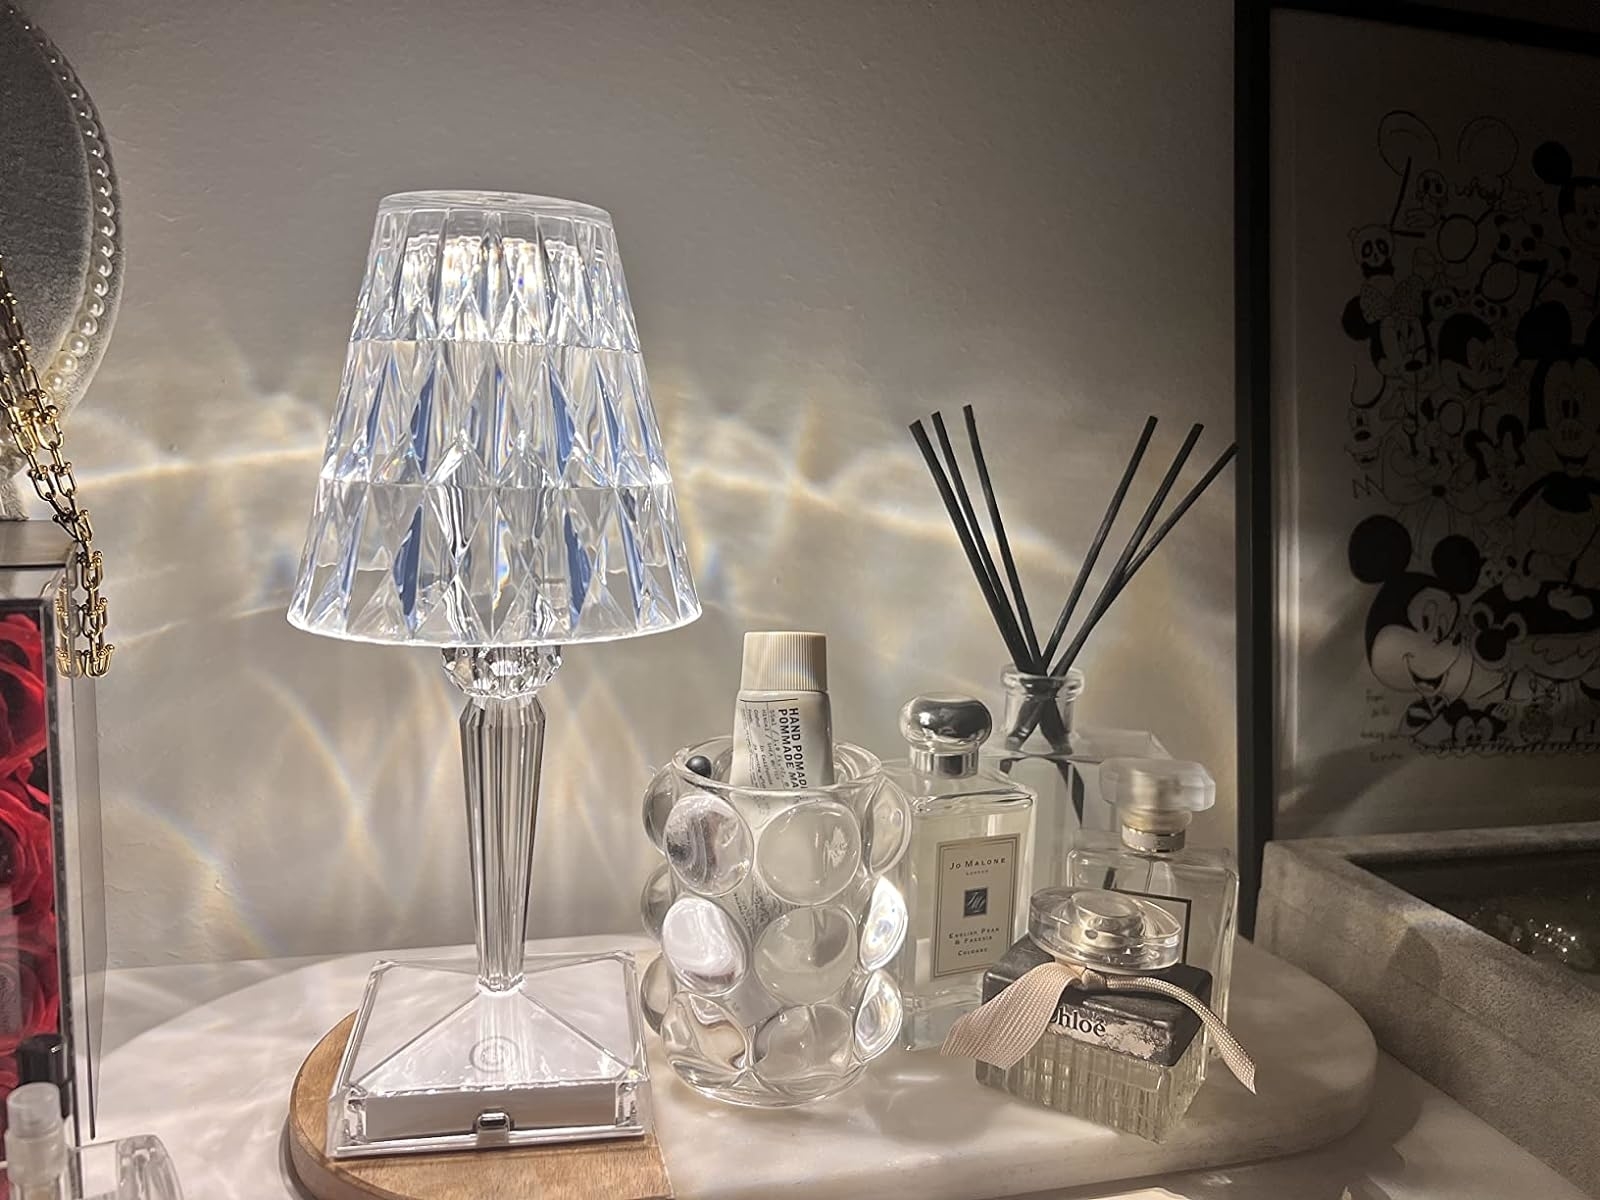 Crystal lamp beside beauty products including Jo Malone and Dior on a vanity shelf with a Mickey Mouse art piece in the background